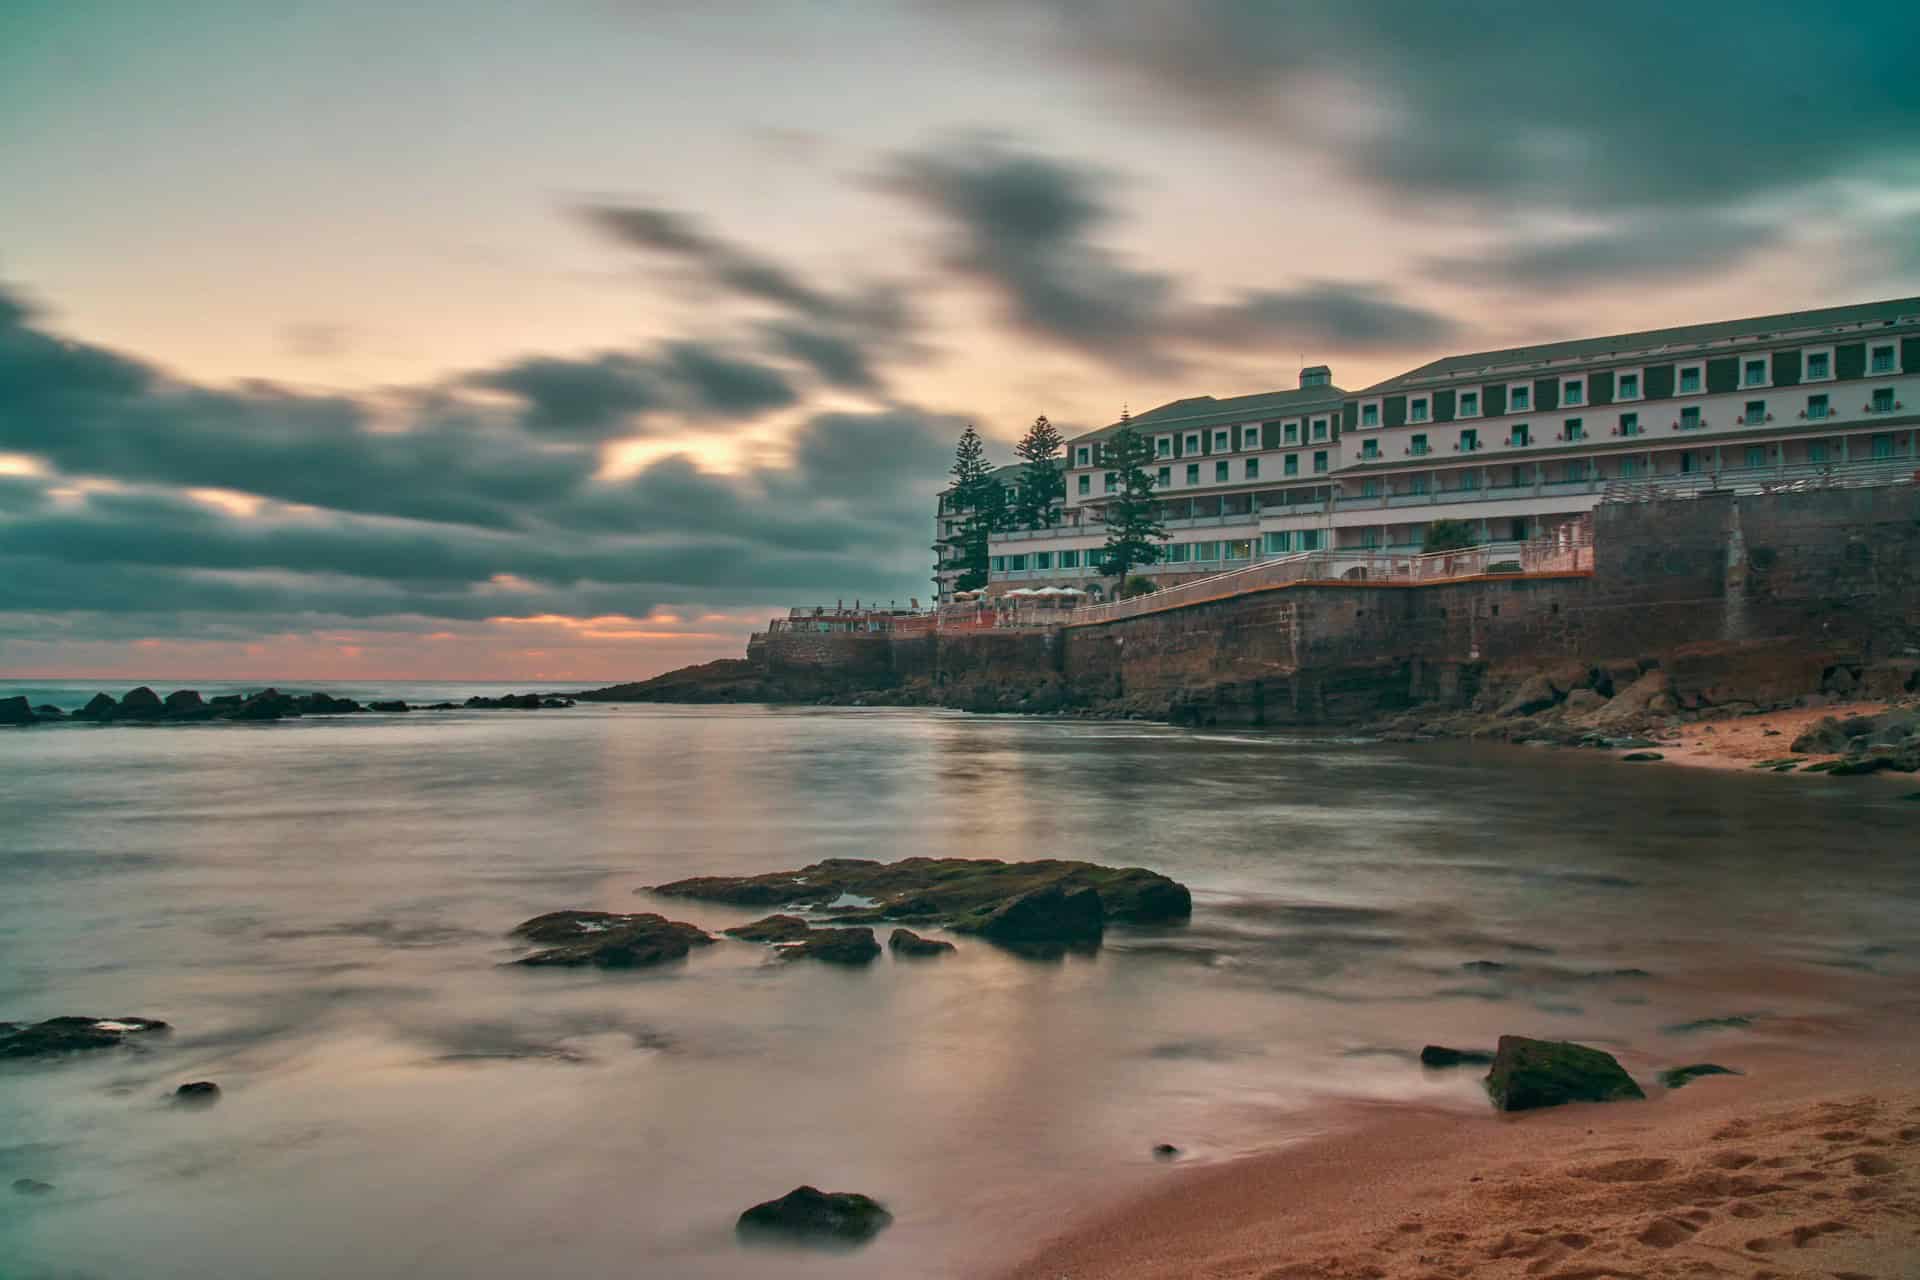 Best things to do in Ericeira Portugal - Rachel Covert - Hotel Vila Galé Ericeira at sunset by Pitua Sutanto on Unsplash